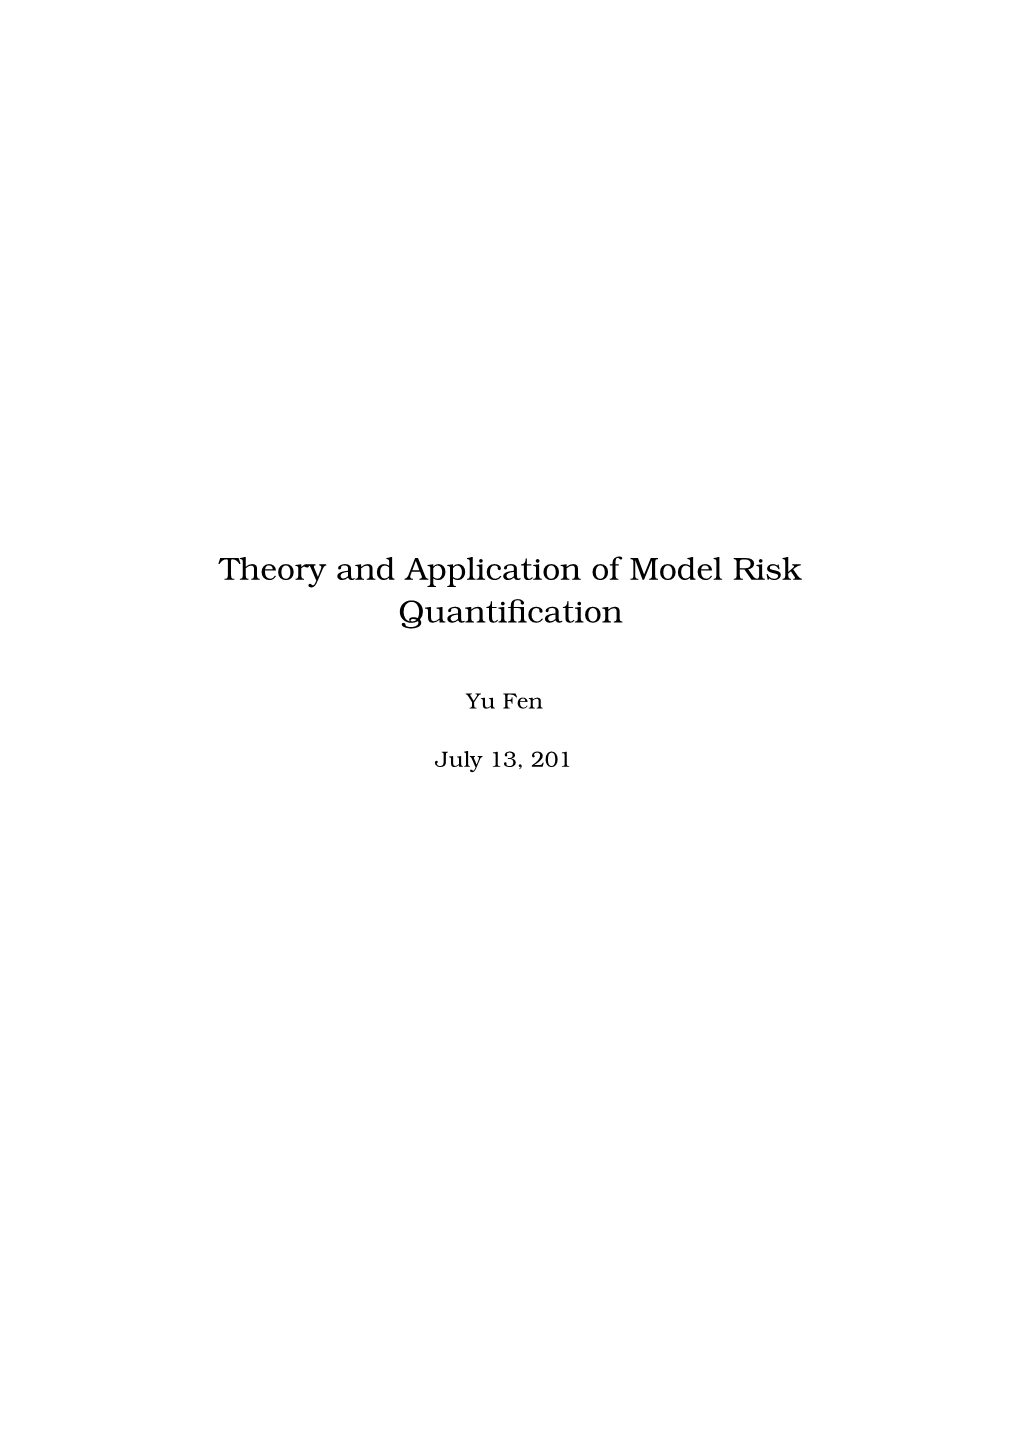 Theory and Application of Model Risk Quantification